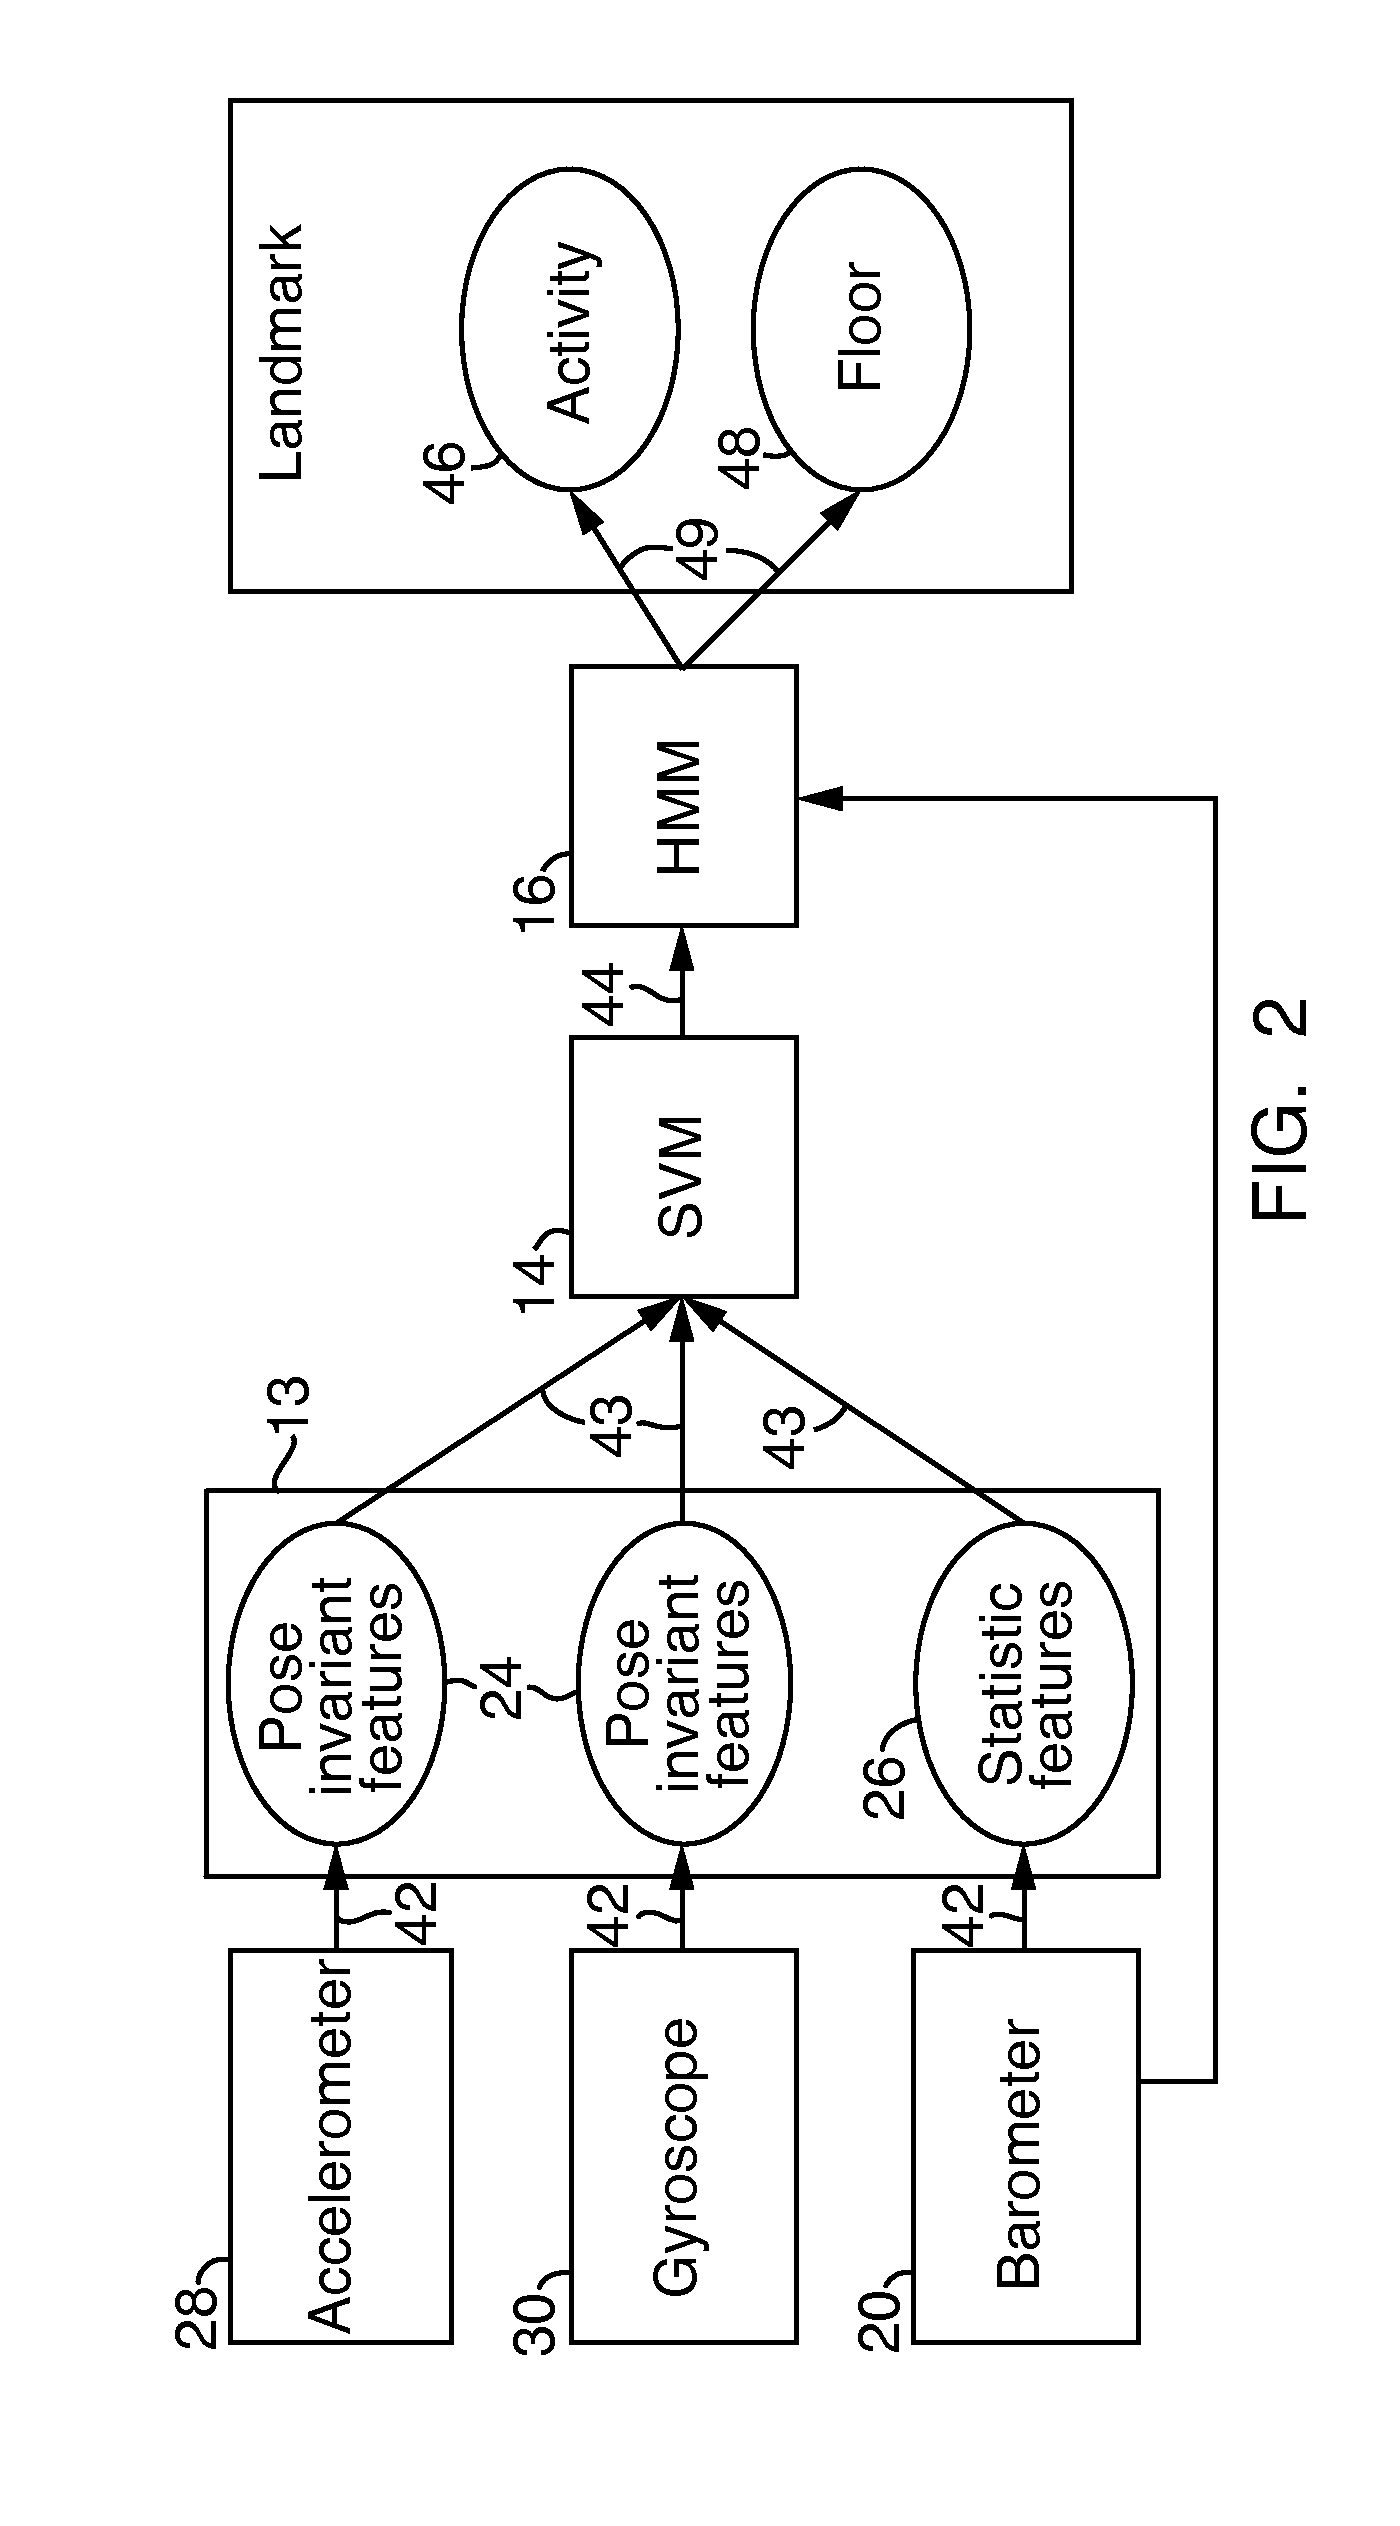 Localization activity classification systems and methods